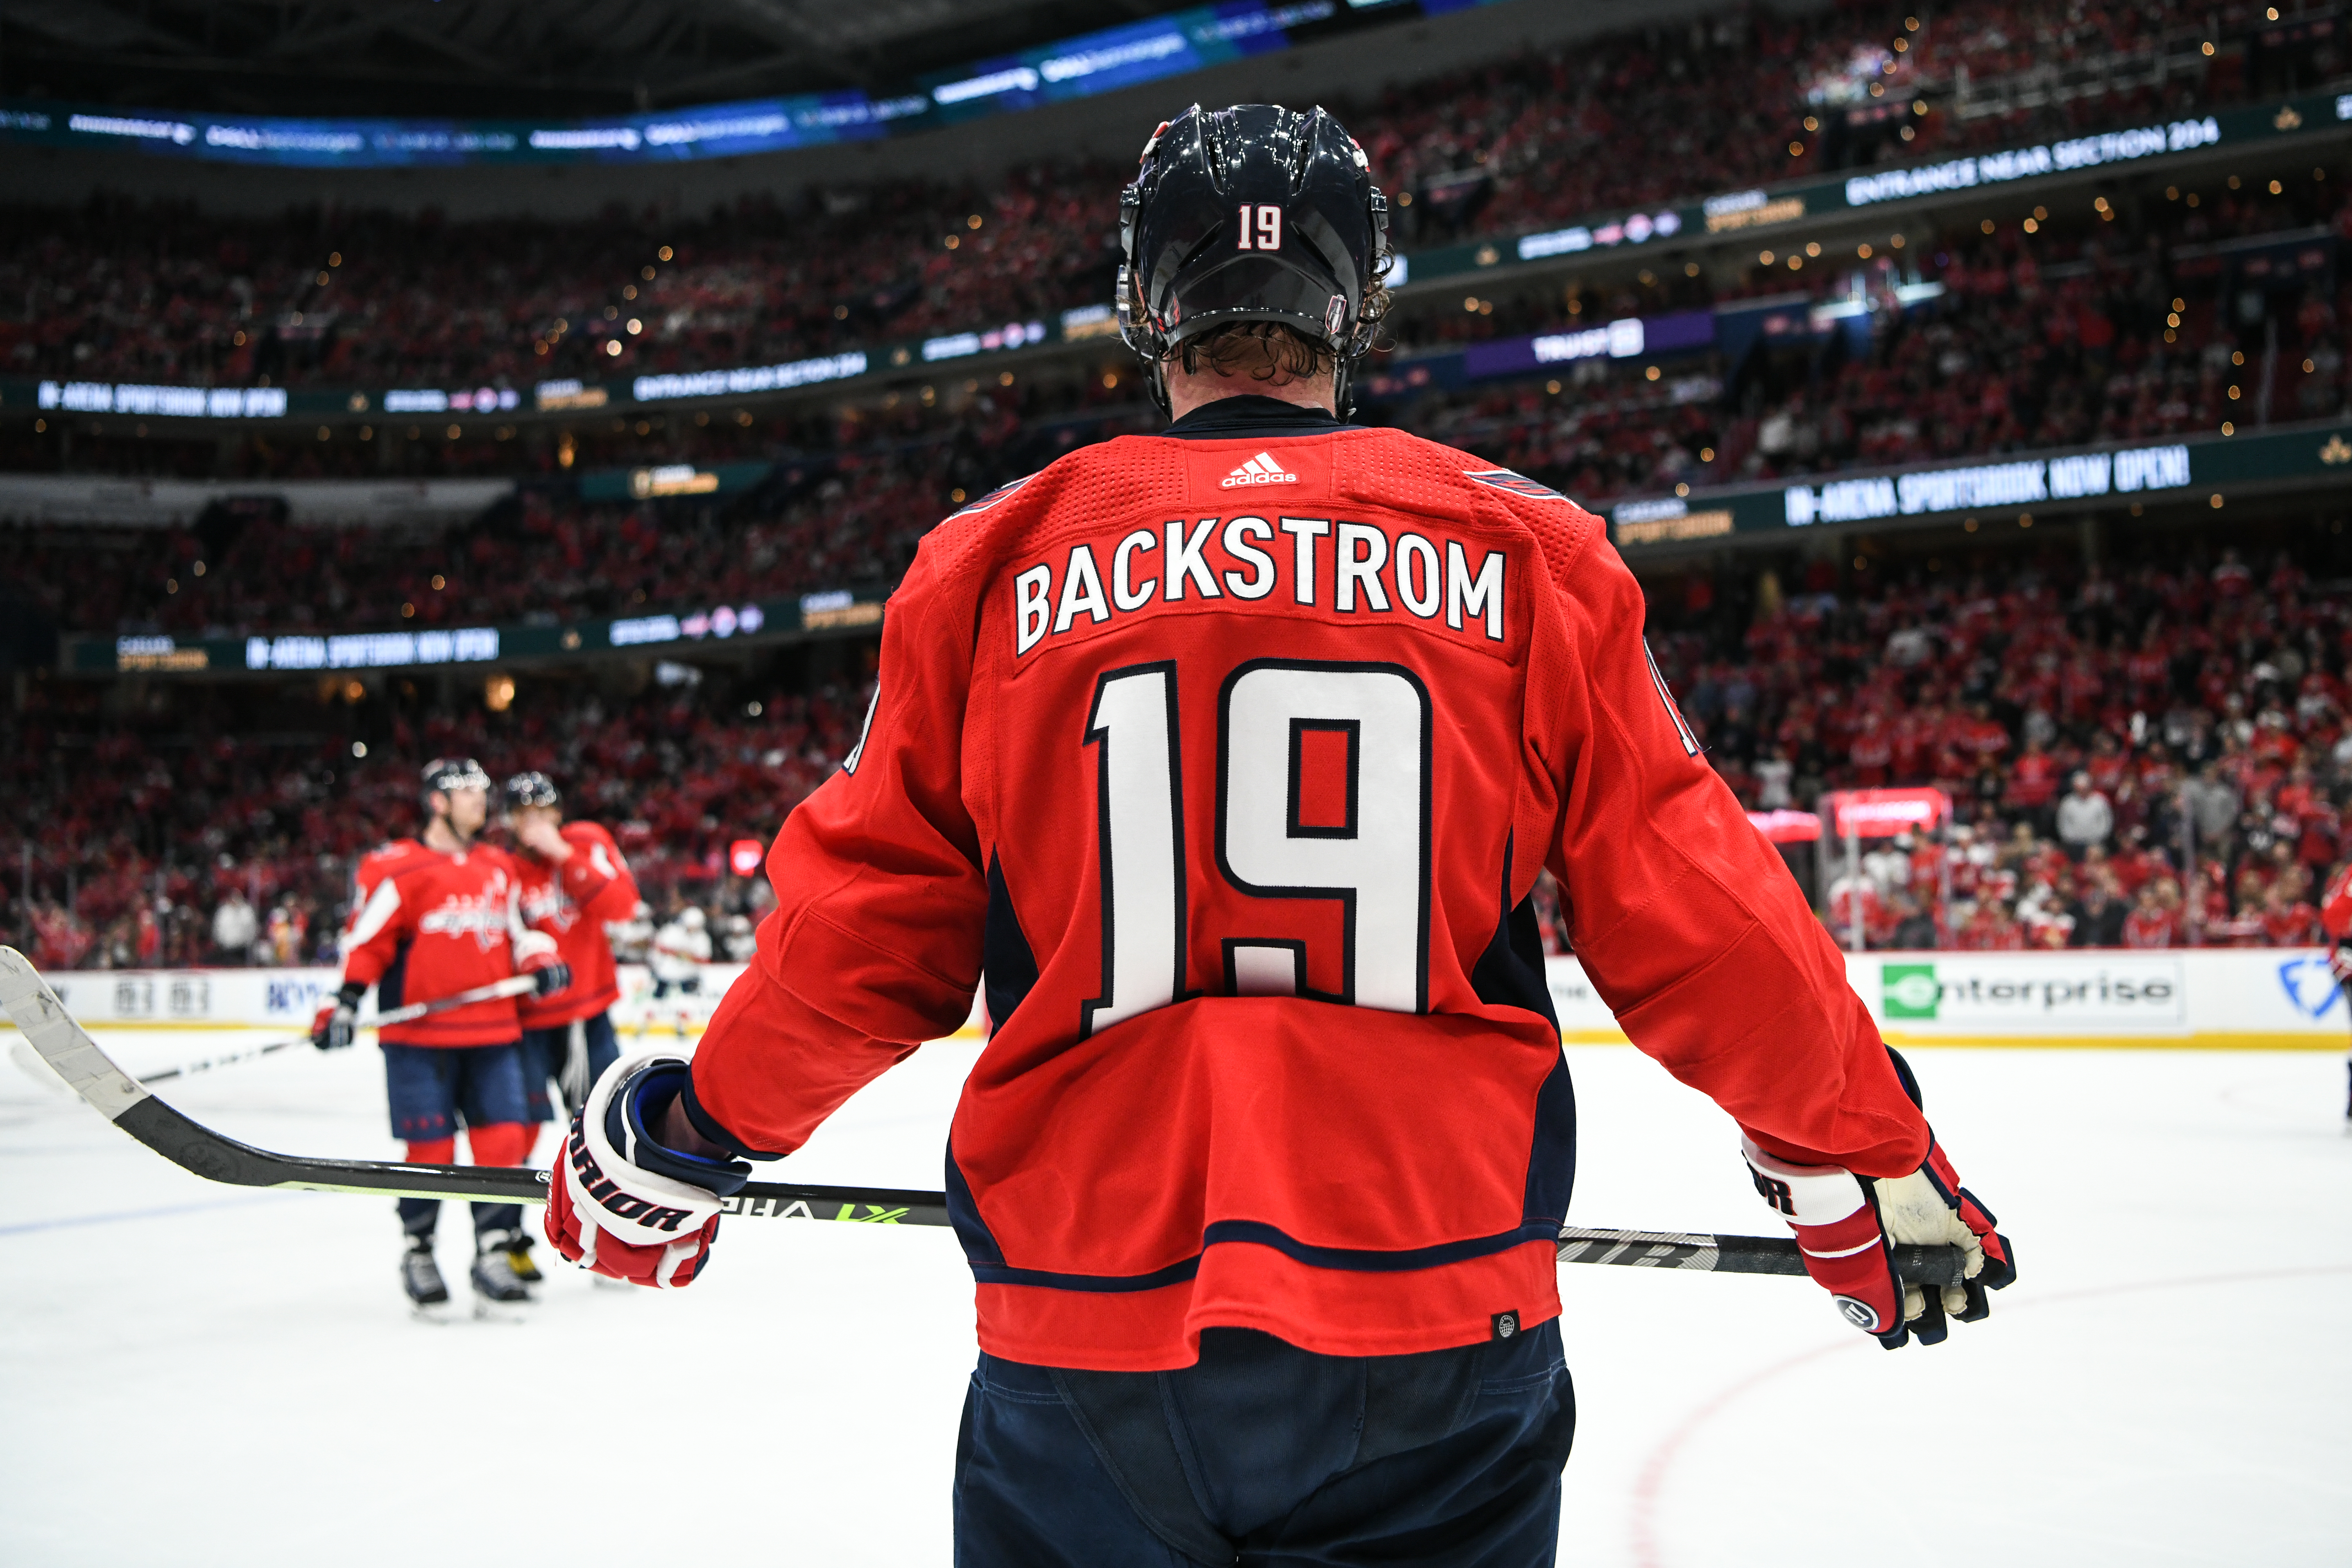 Capitals sign Backstrom to 10-year deal